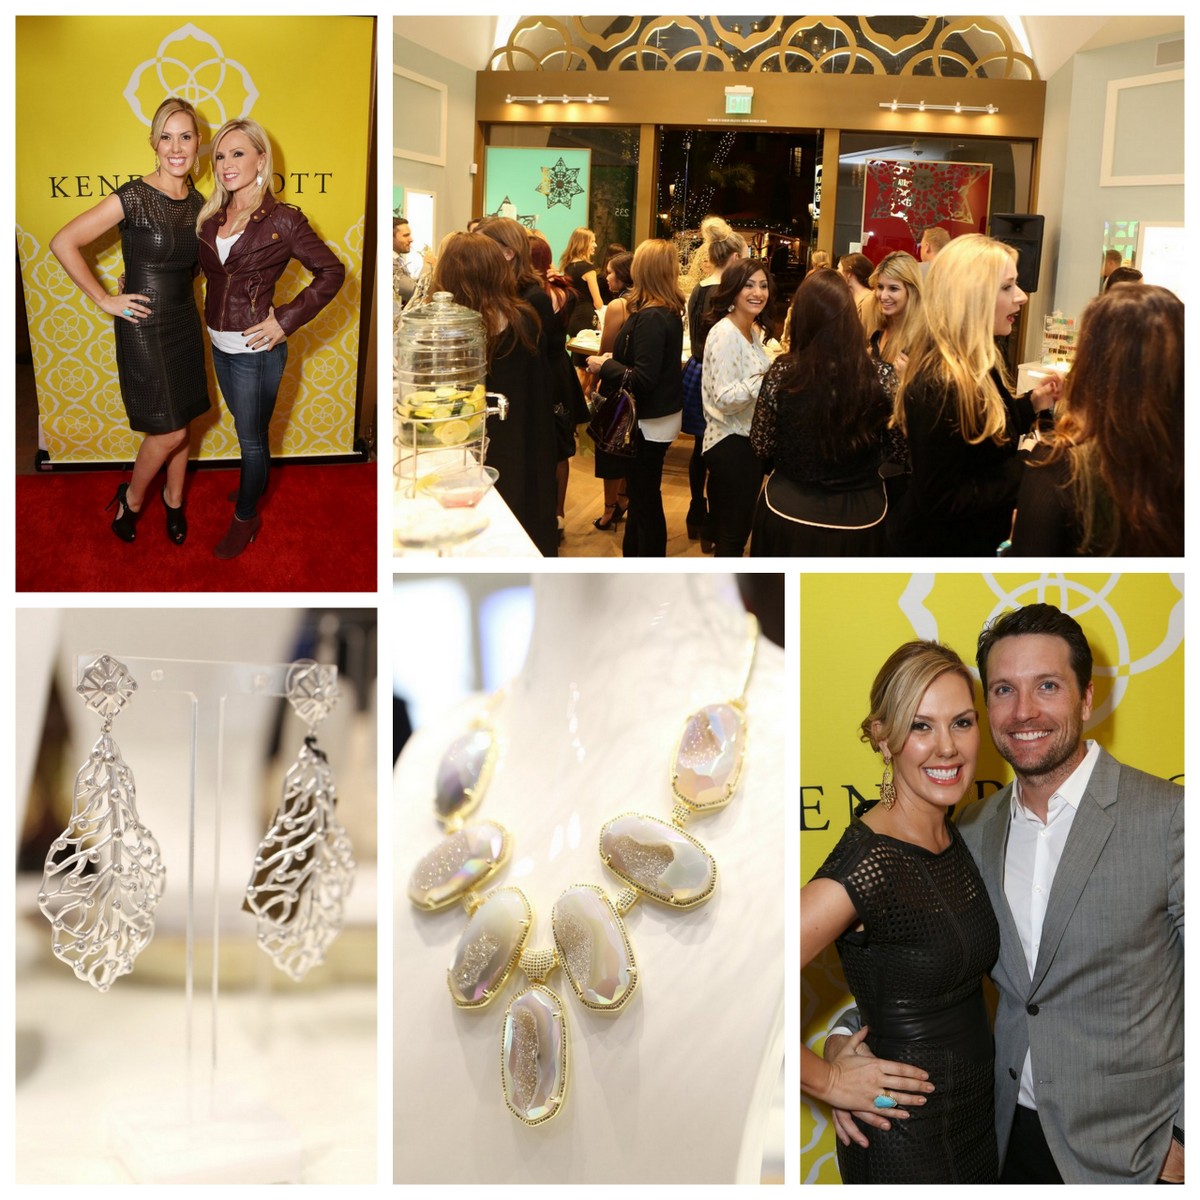 Kendra Scott launch party for LUXE